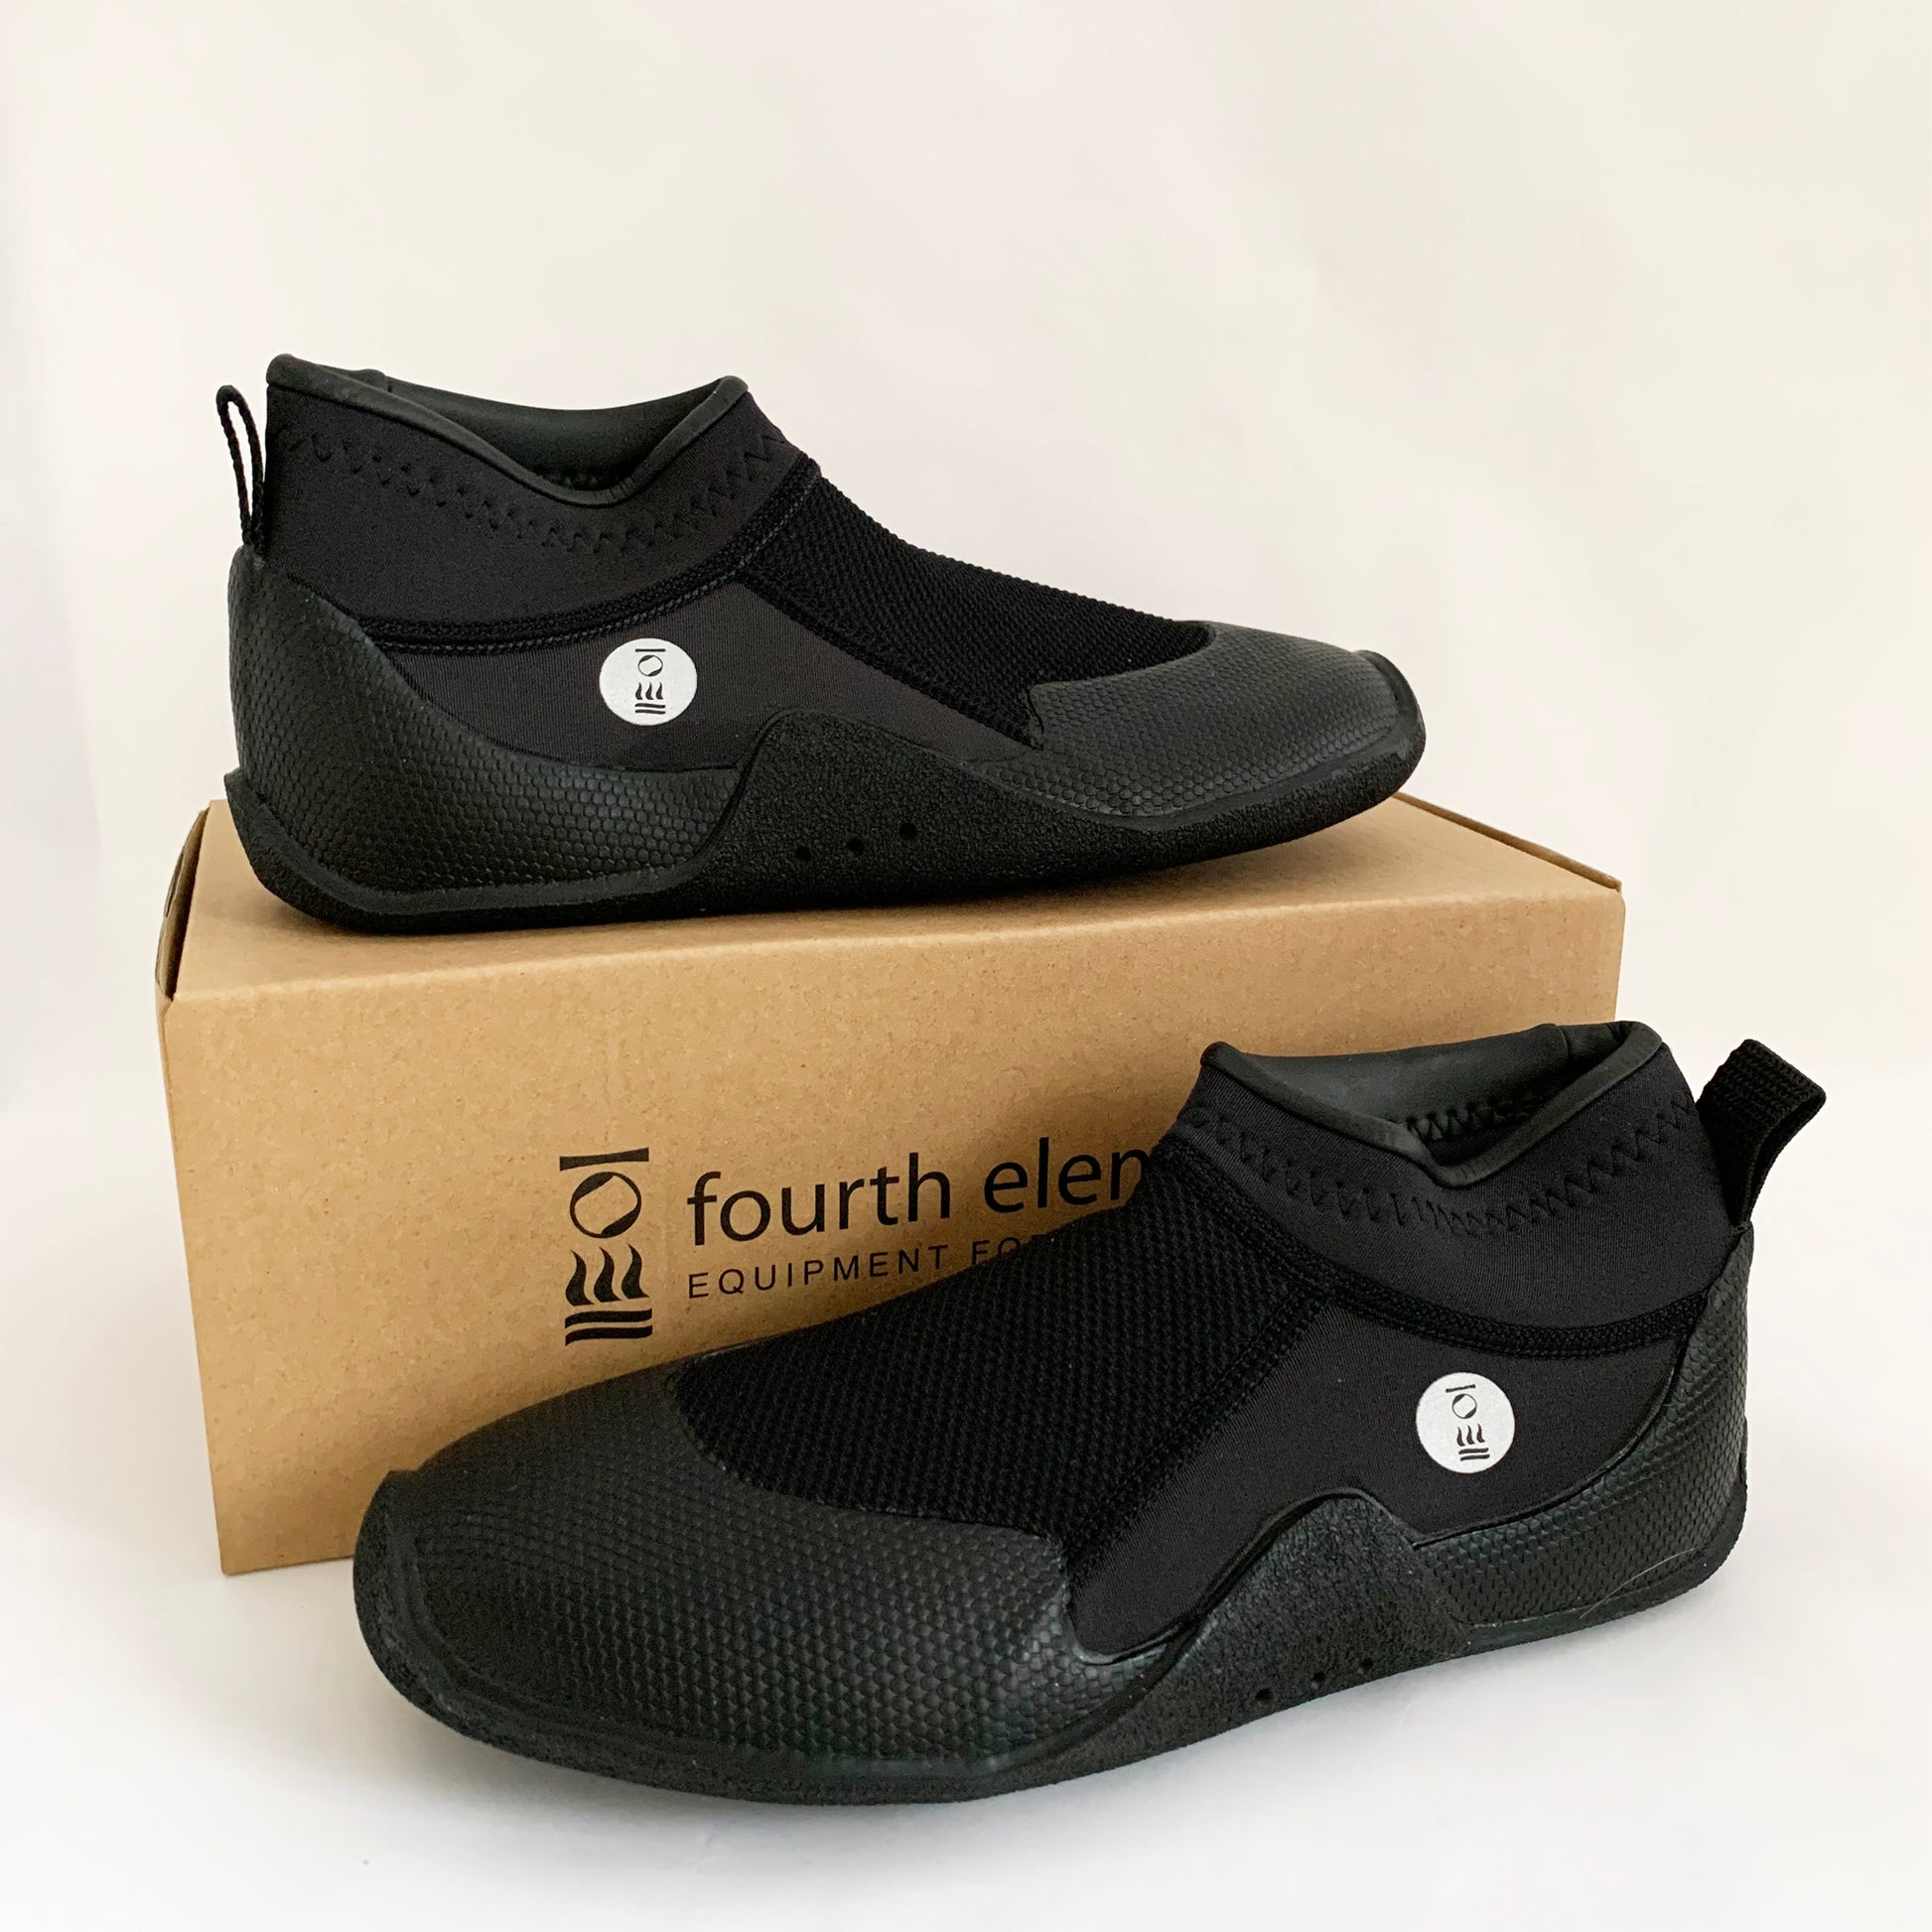 neoprene black boots for swimming with box